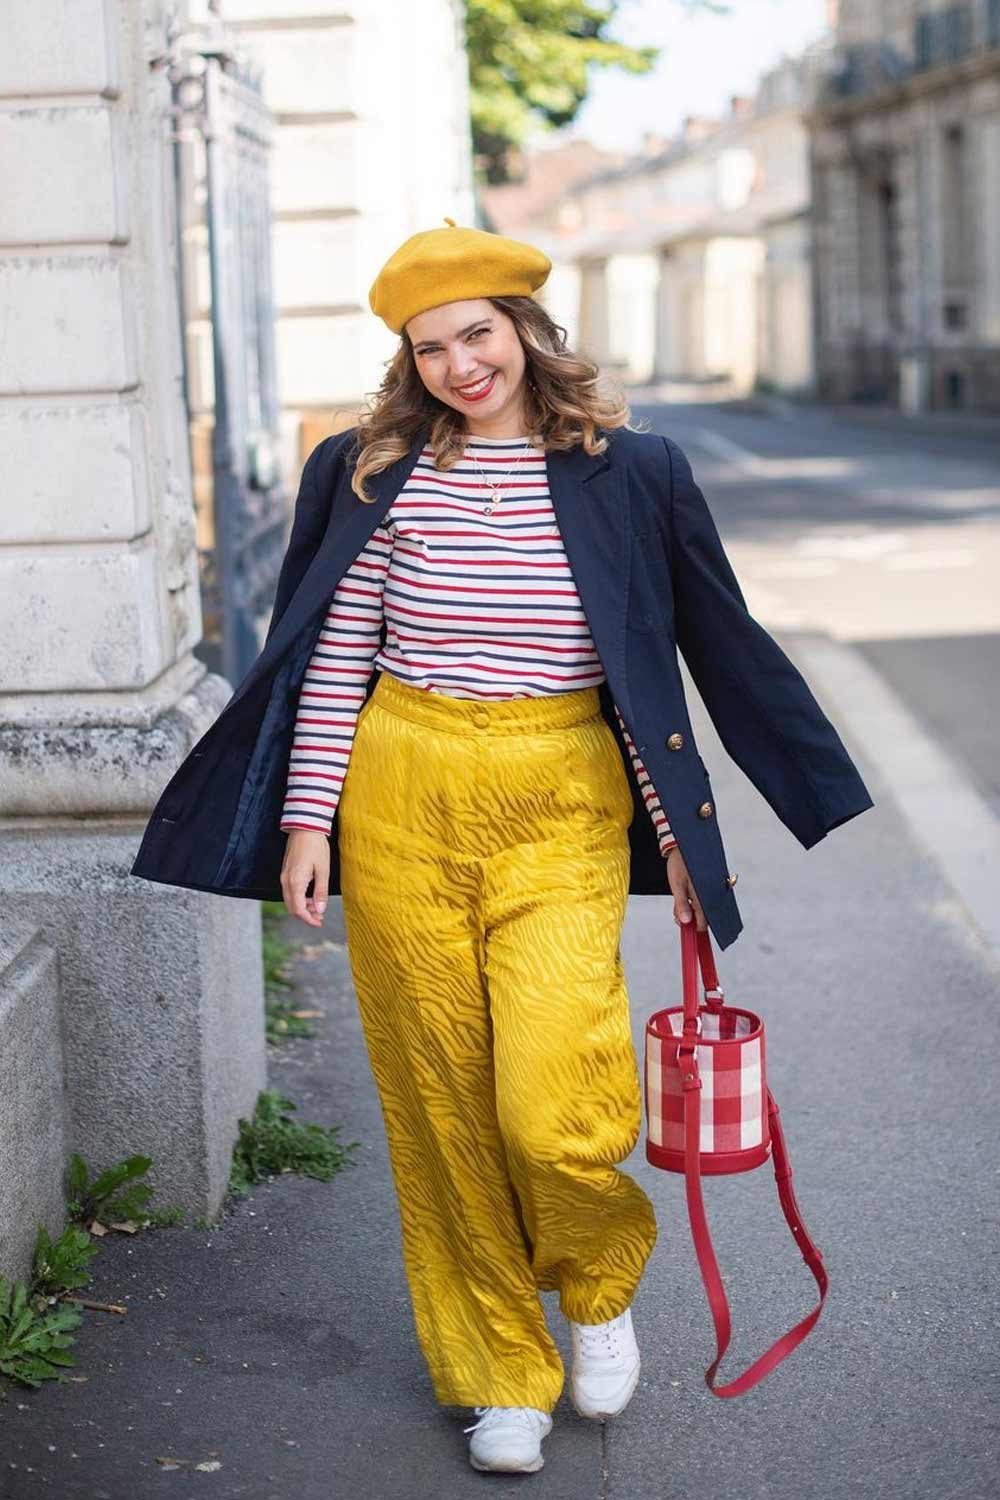 Valentines Day Outfits with Bright Yellow Accent